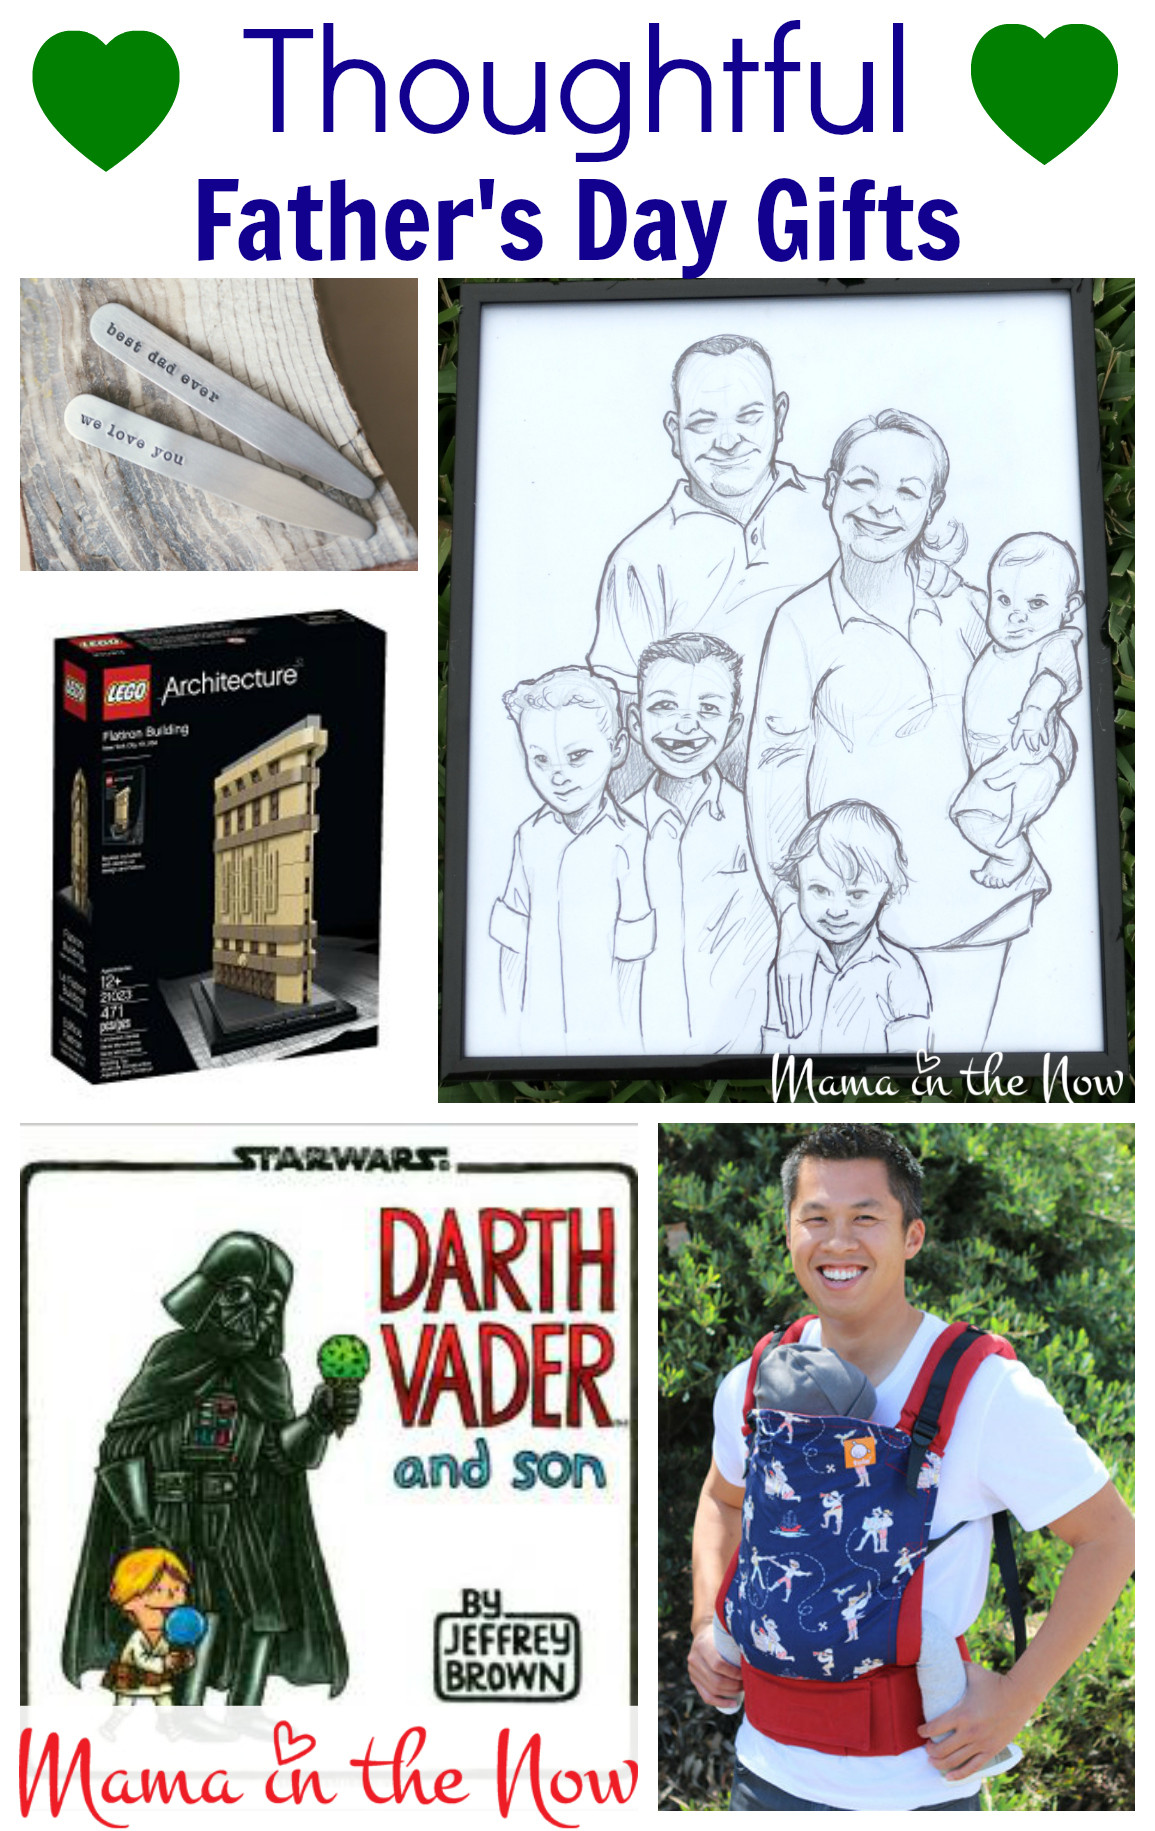 Thoughtful Fathers Day Gift Ideas
 Thoughtful Father s Day Gifts From the Kids